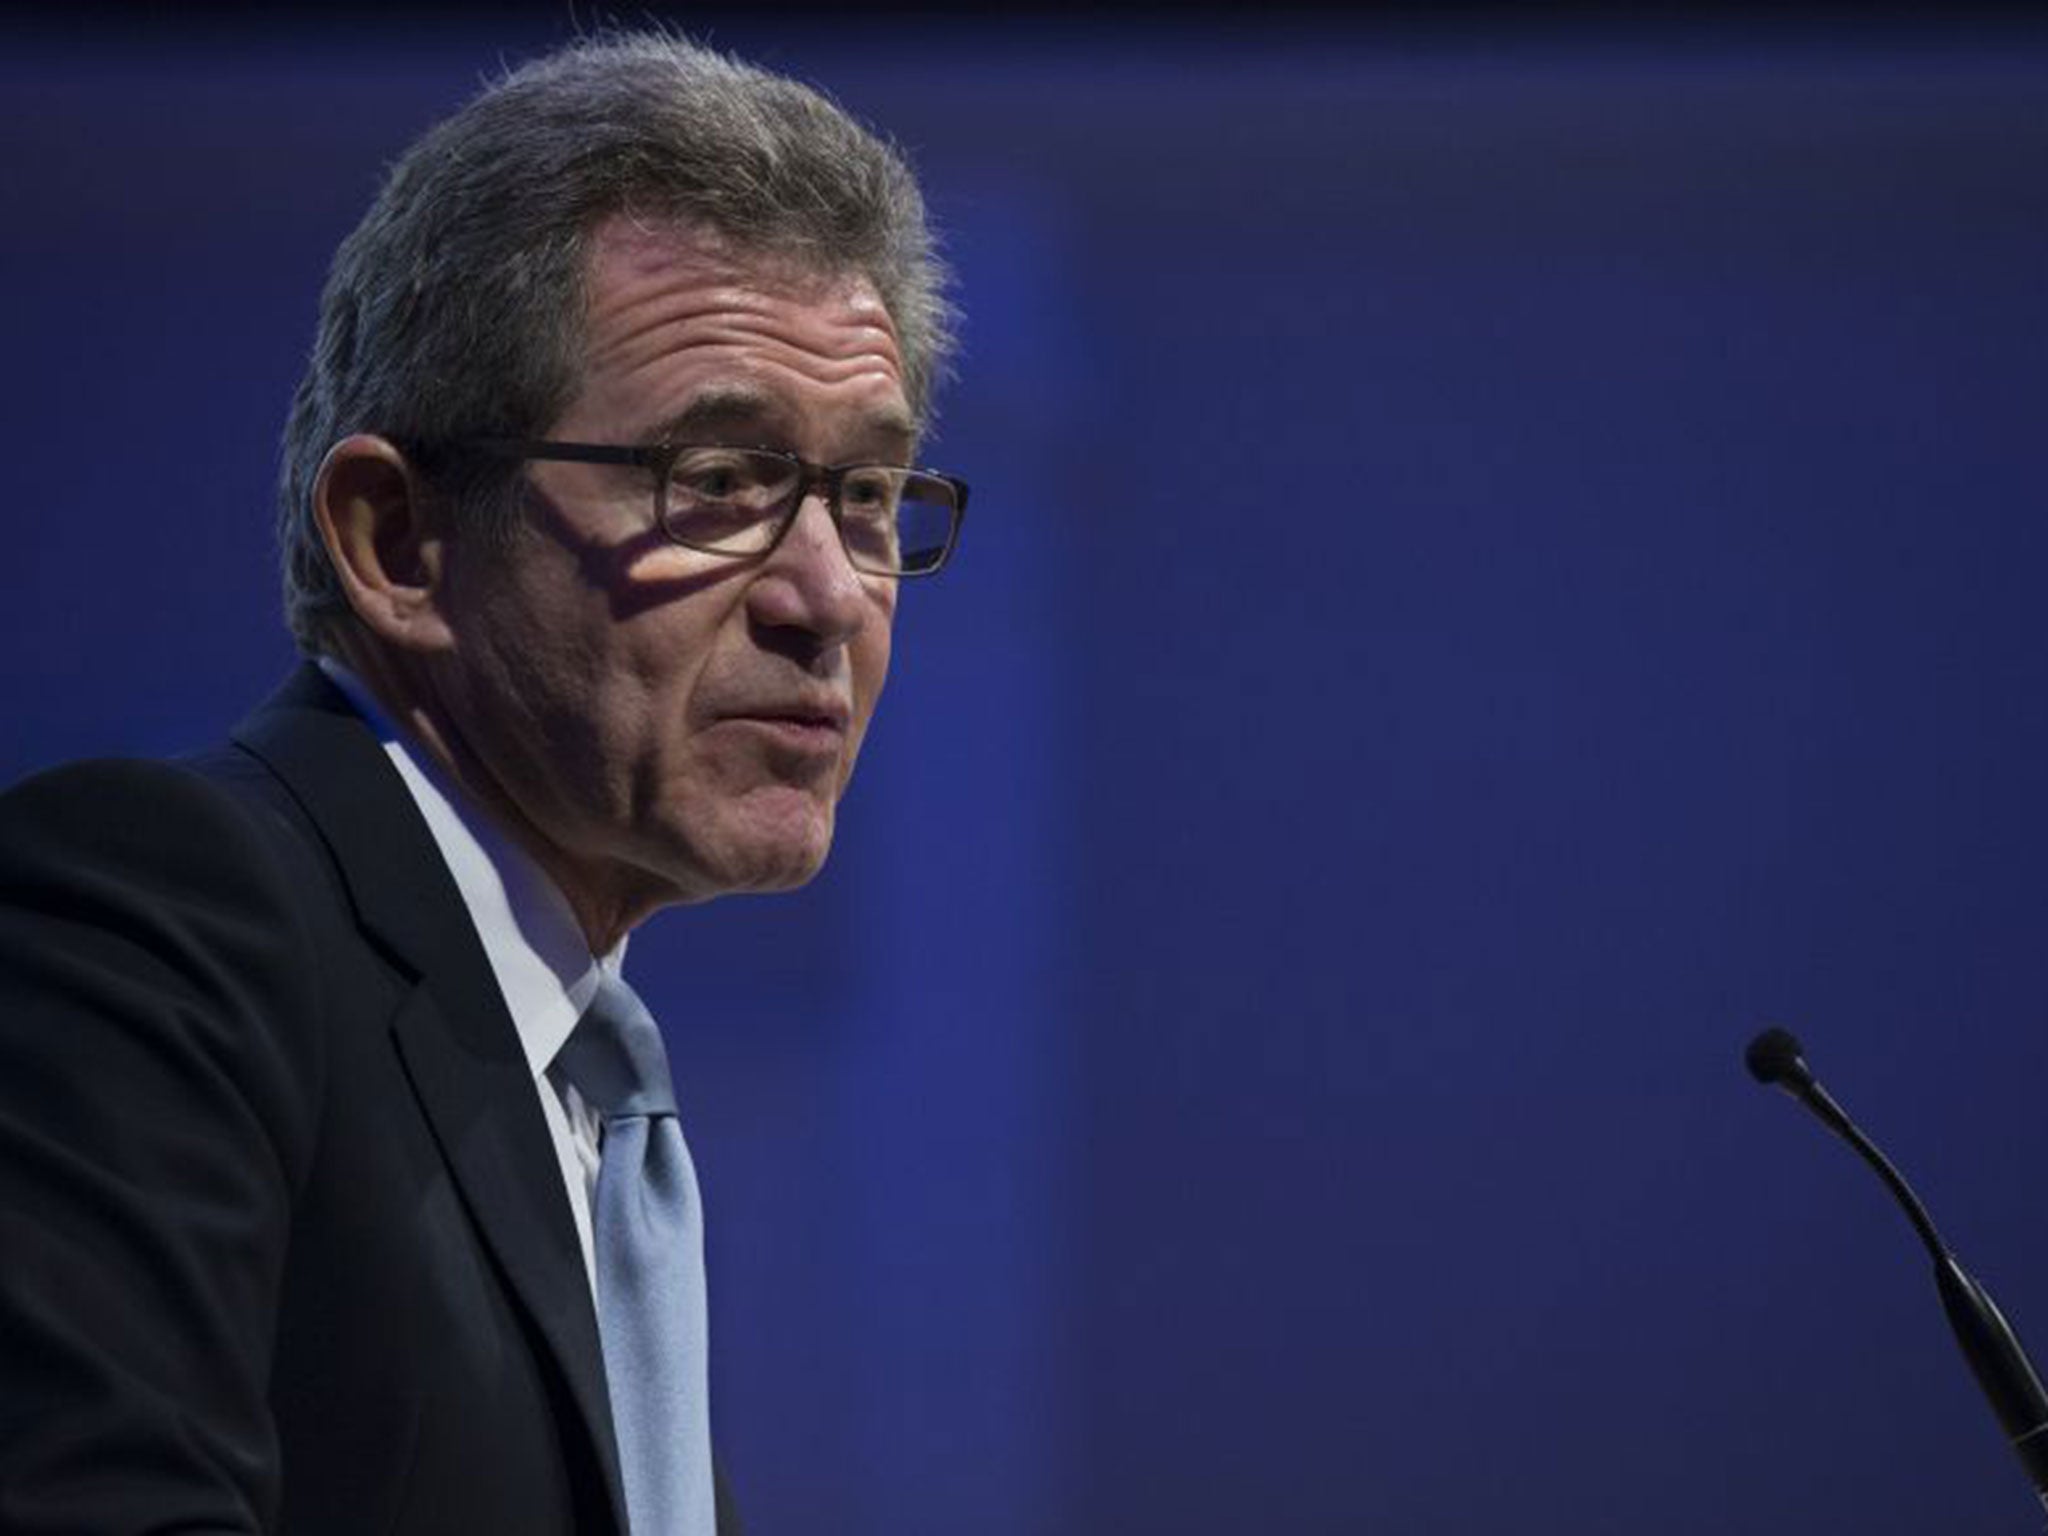 Lord Browne is the chairman of controversial fracking firm Caudrilla